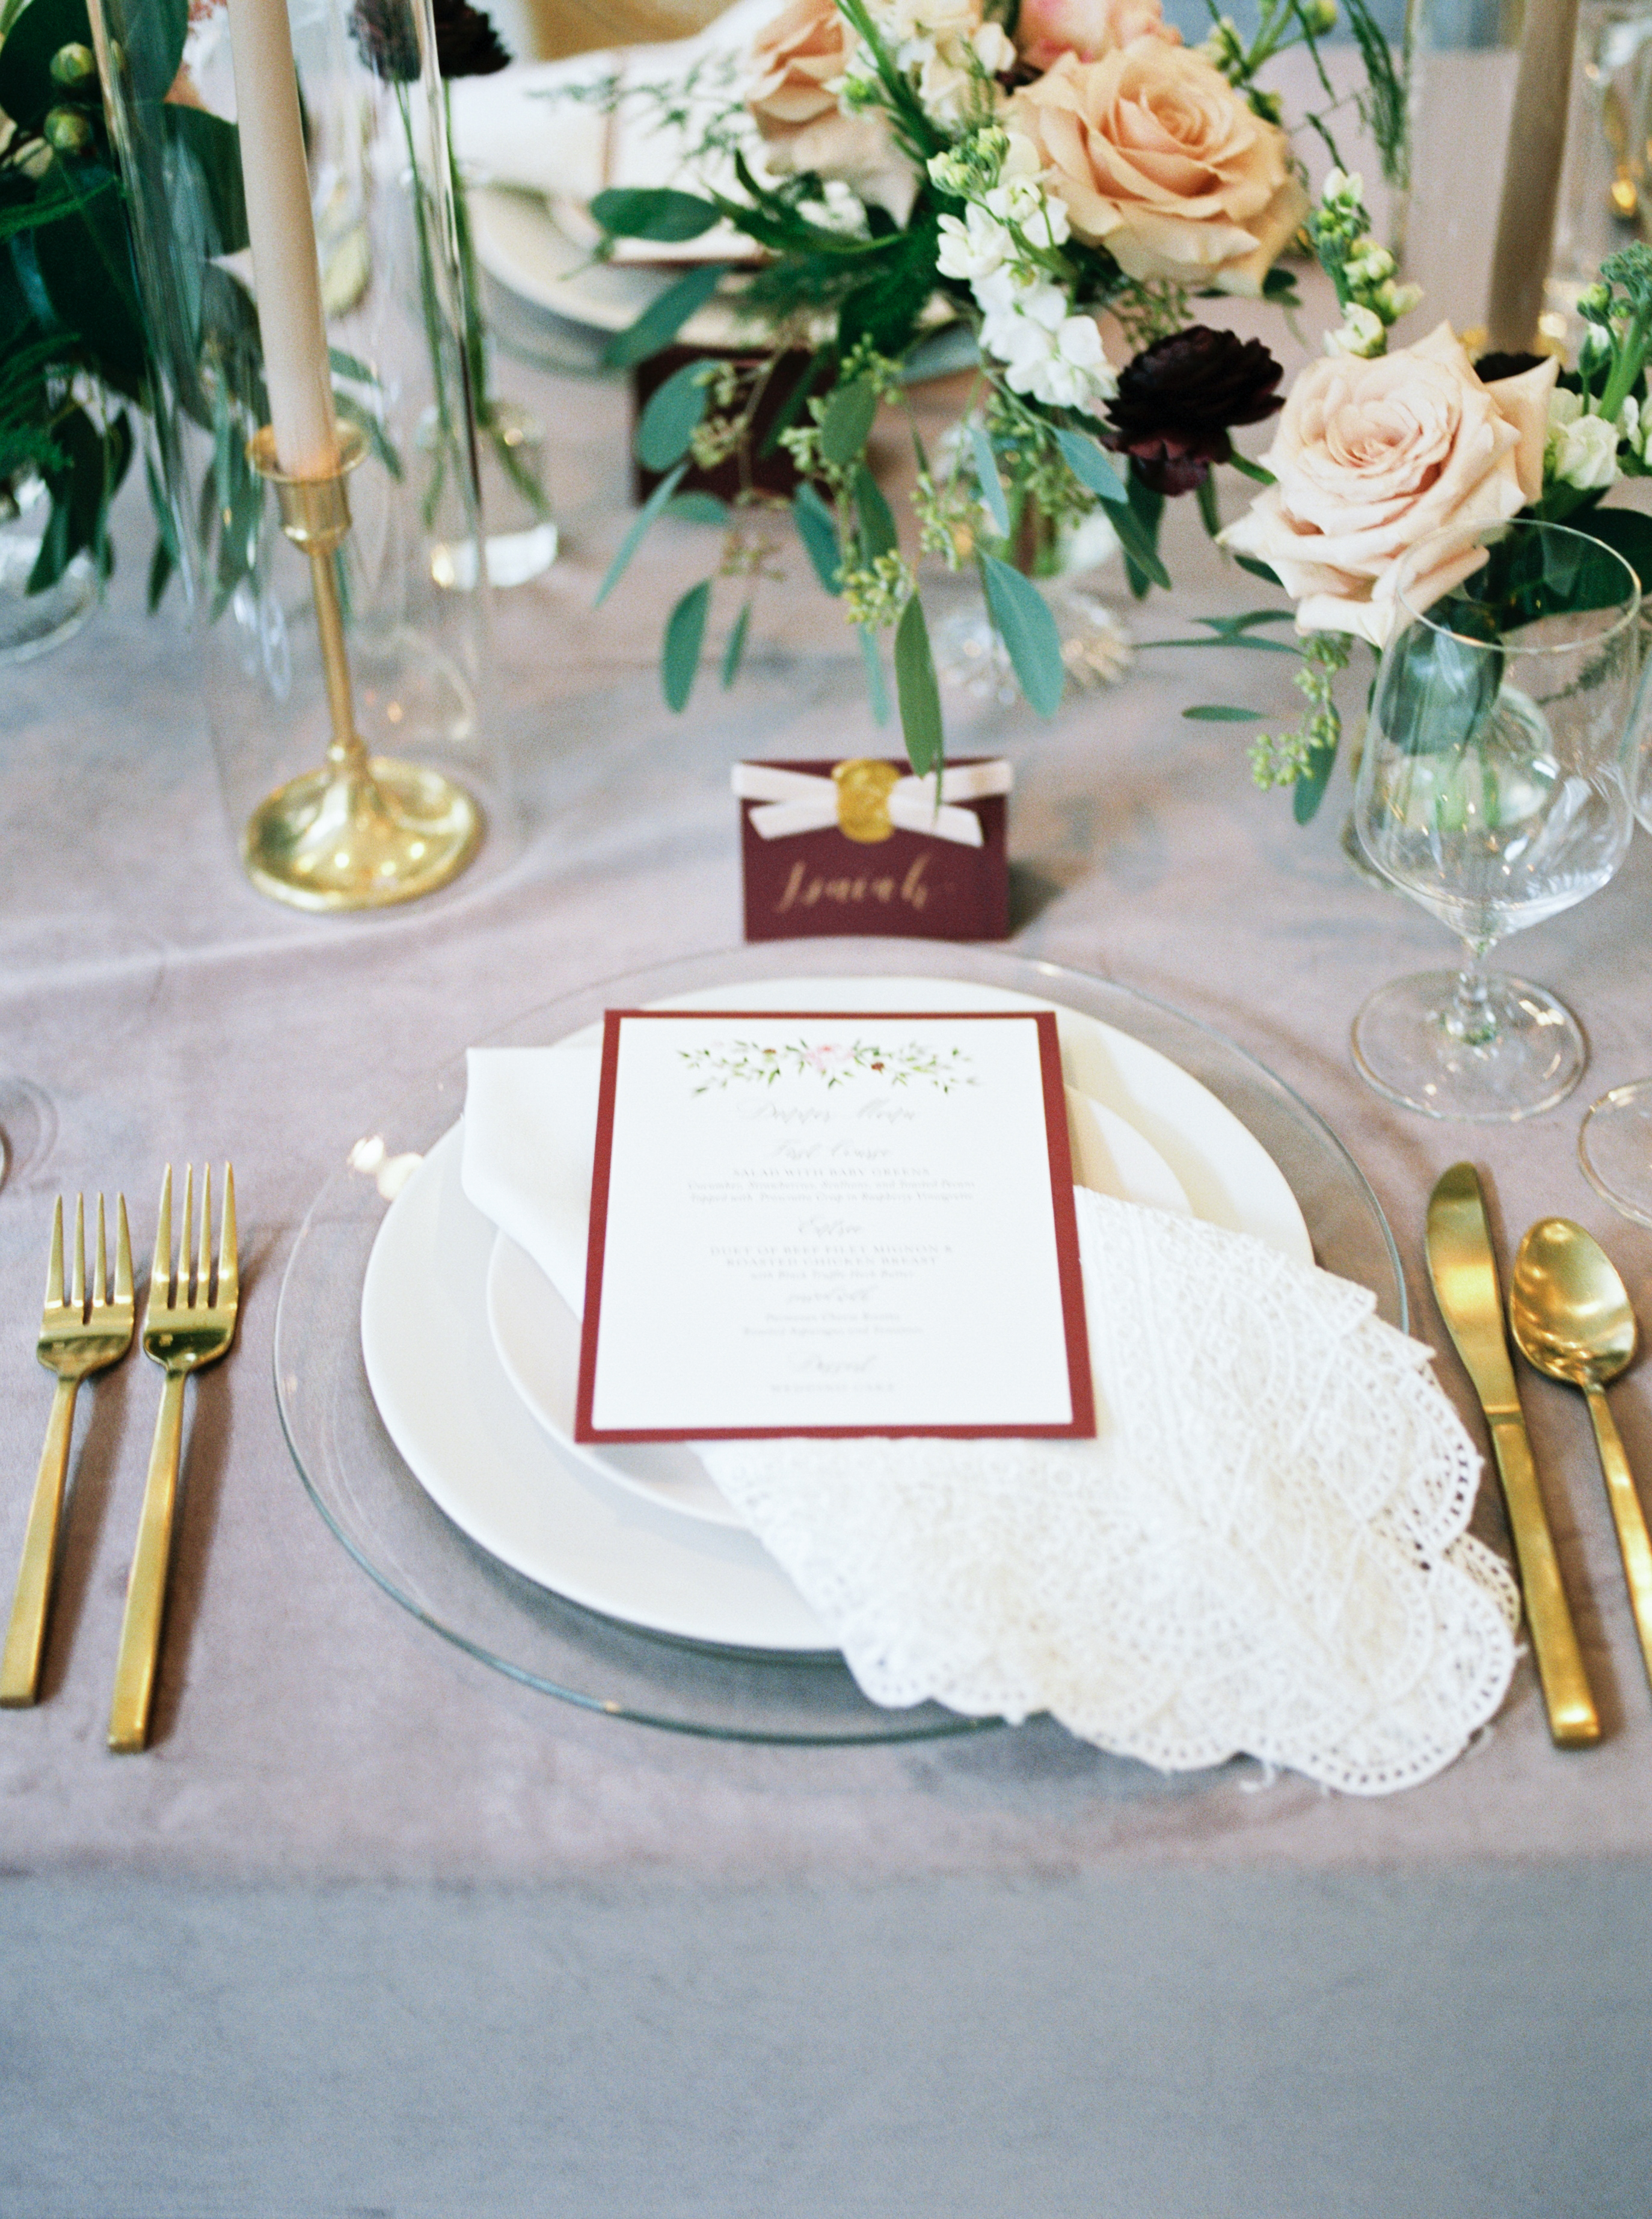 How To Make Your Wedding Guests Feel Loved | At Greensboro, NC Venue, McAlister-Leftwich House | Design by Rebecca Rose Events | Calligraphy by Happy Tines | Photo by Hillary Muelleck